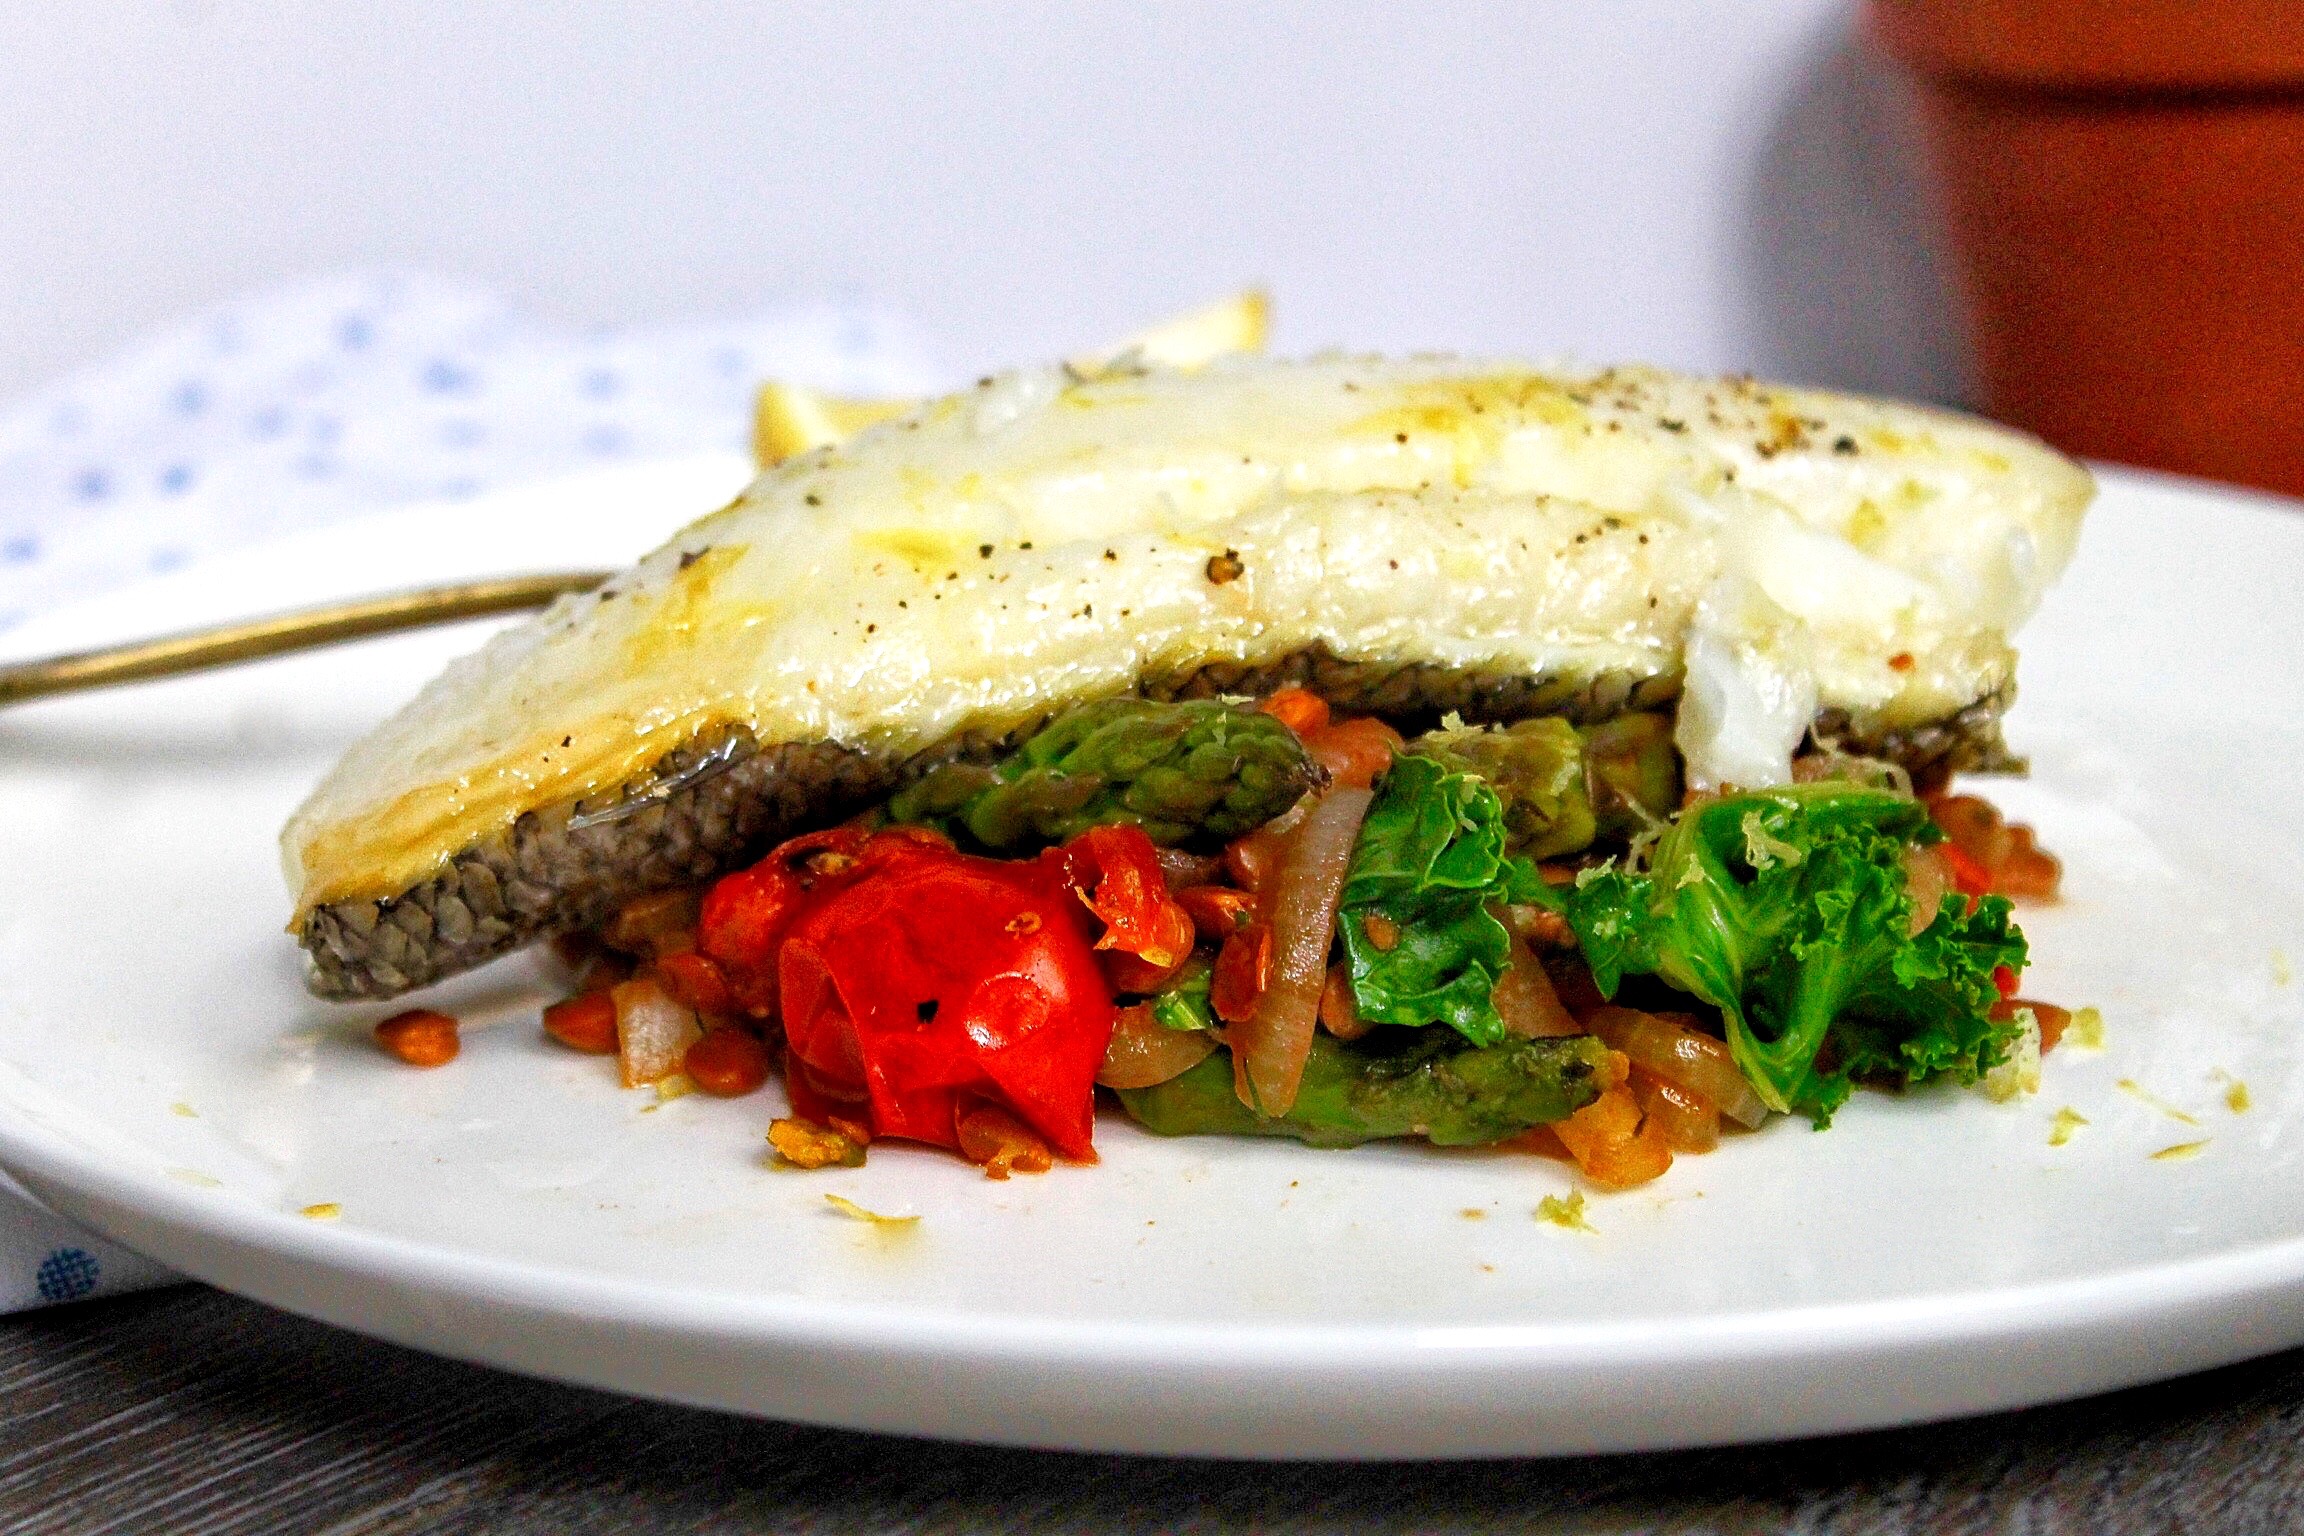 Sea Bass with Lentils, Tomatoes and Asparagus